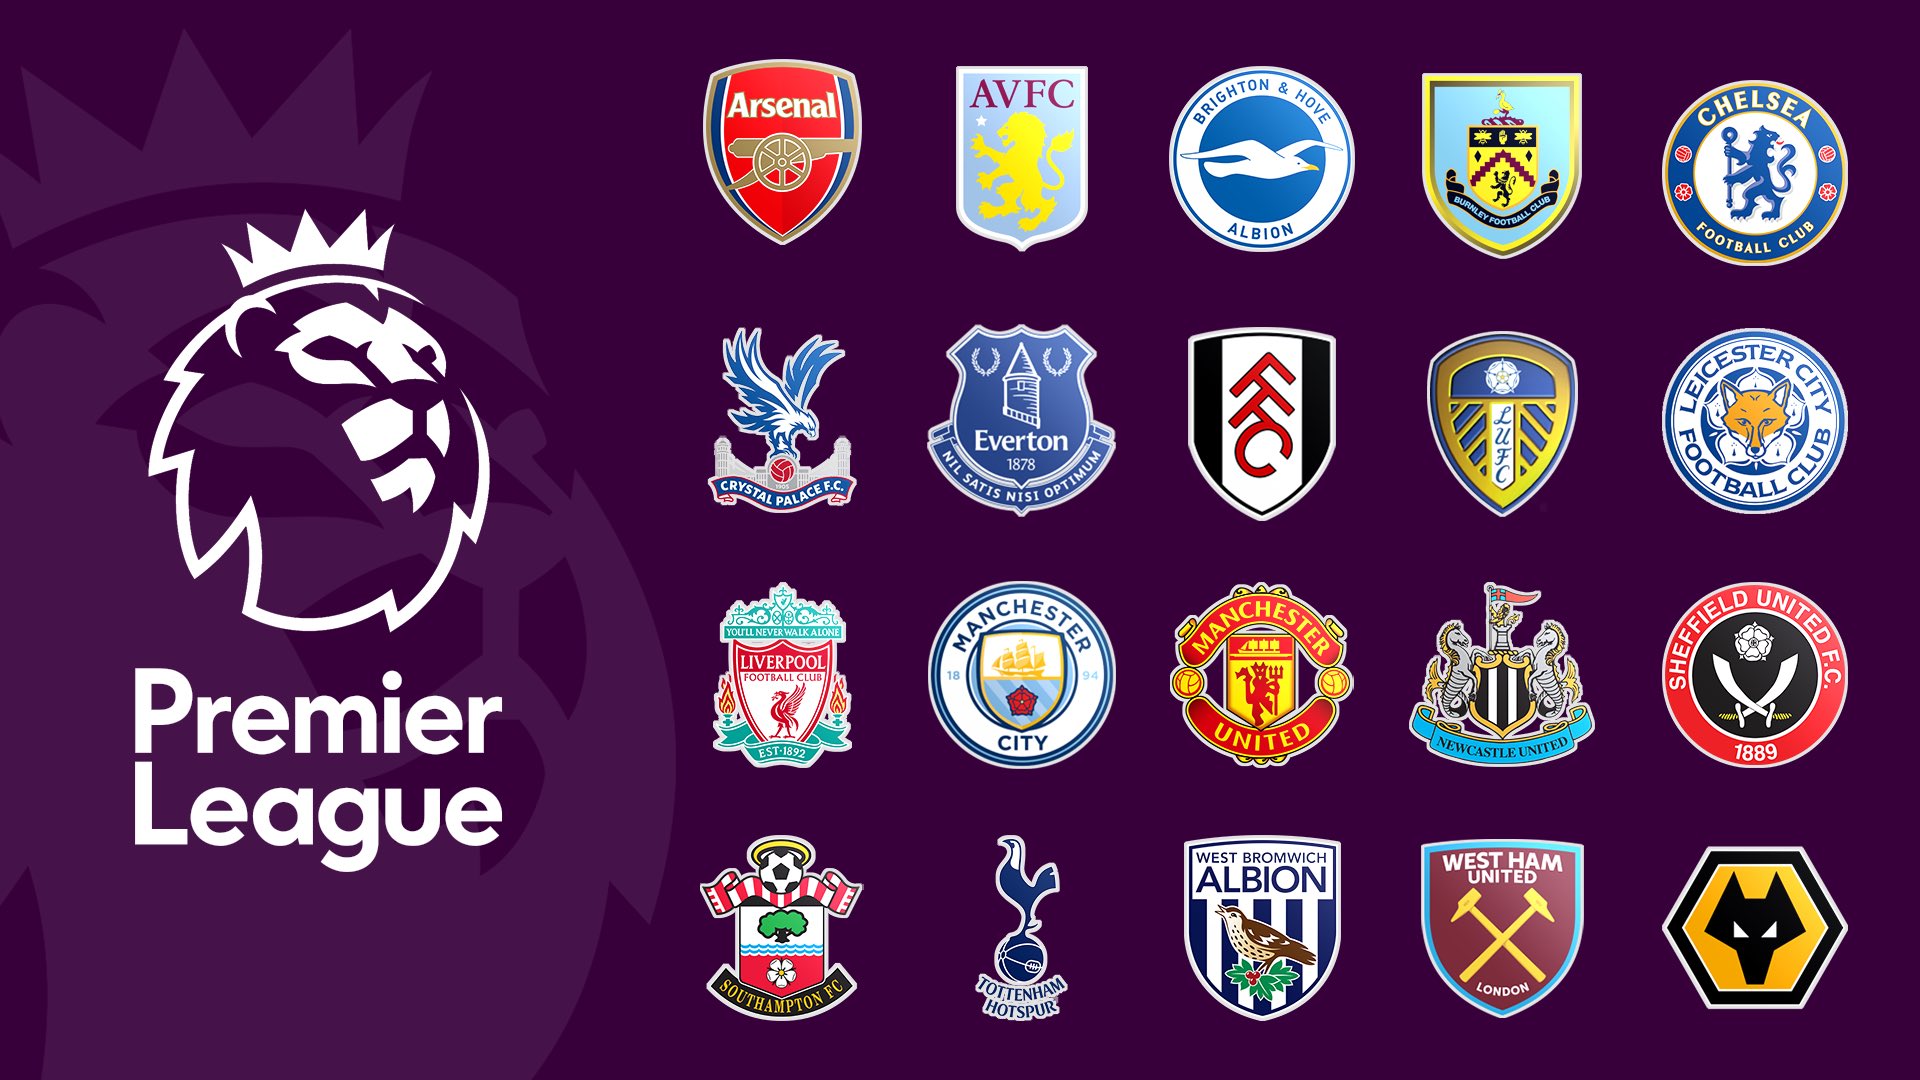 Premier League Results, Fixtures and Latest News